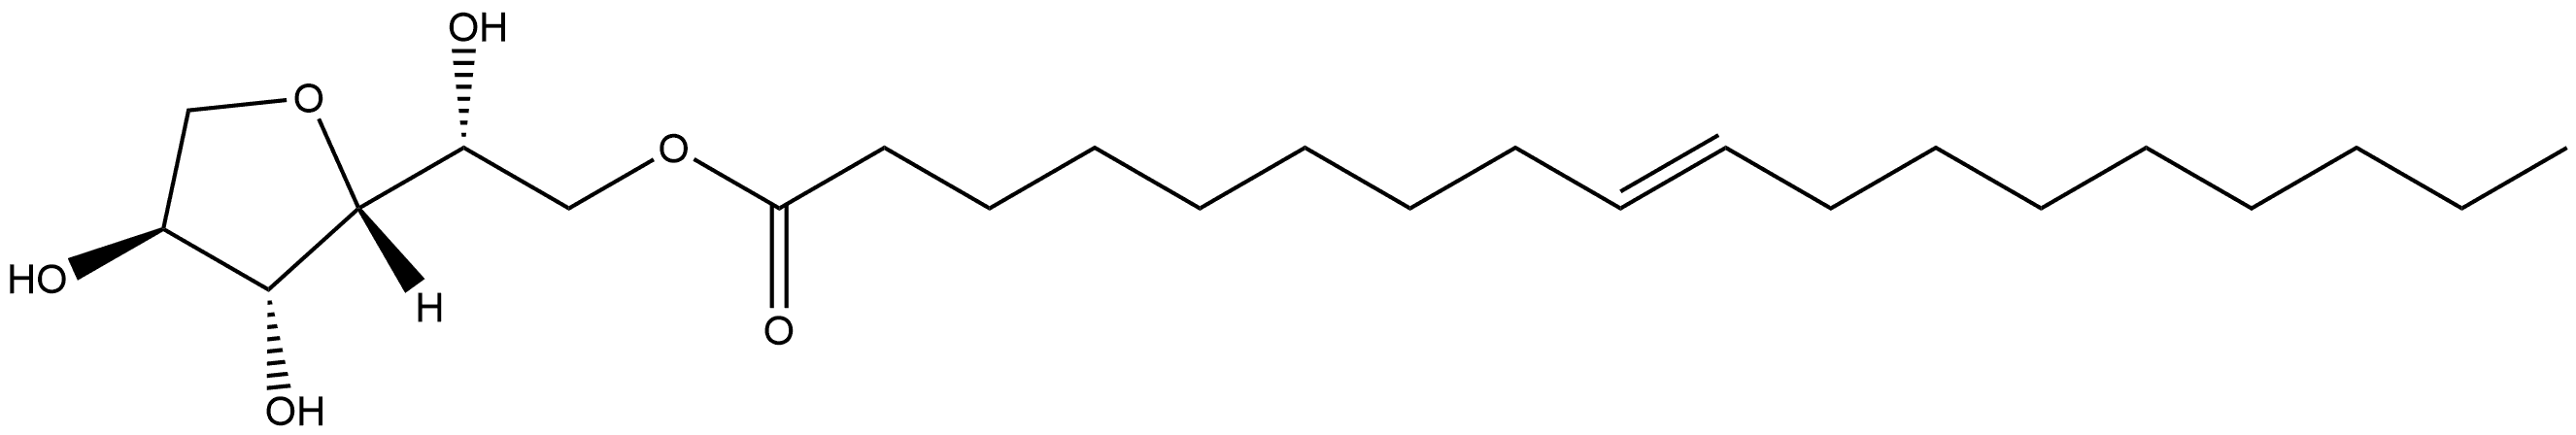 D-Glucitol, 1,4-anhydro-, 6-(9E)-9-octadecenoate 结构式